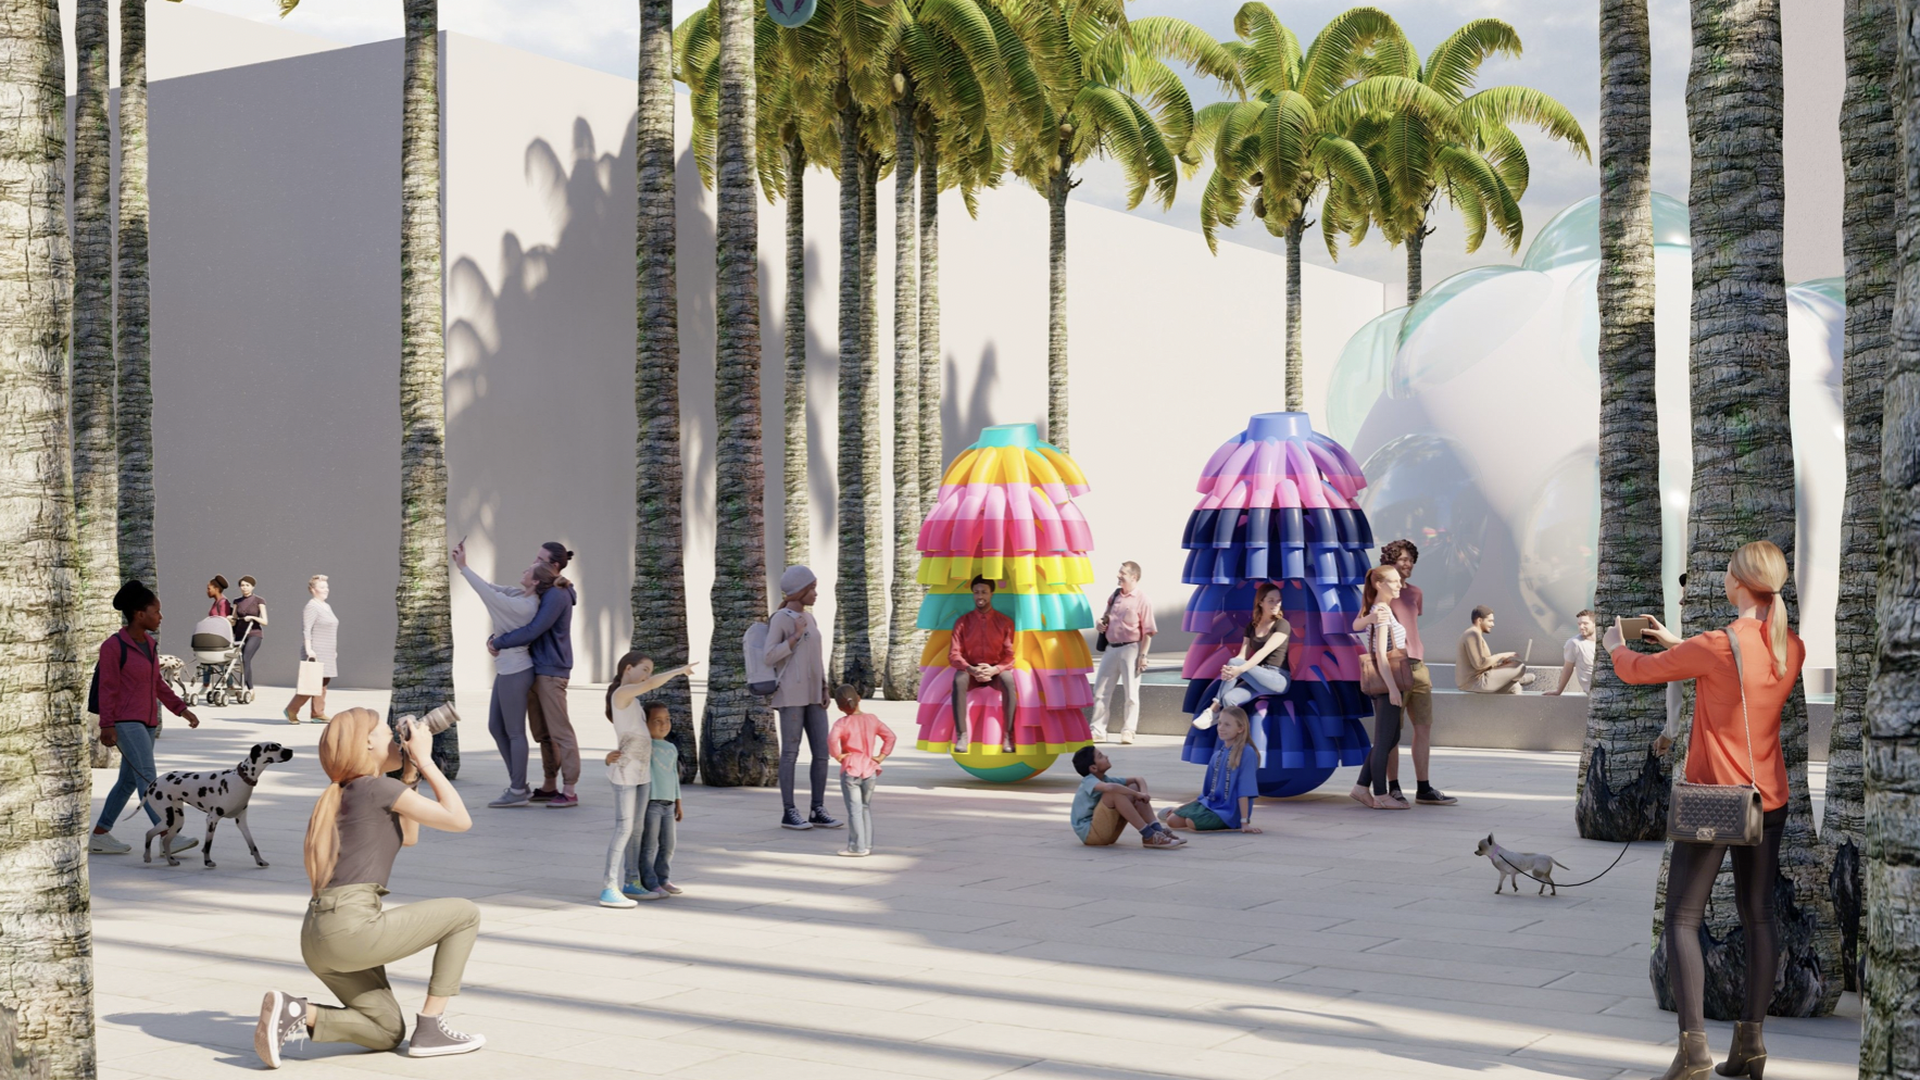 Colorful umbrella-type installations line a street beneath palm trees. 